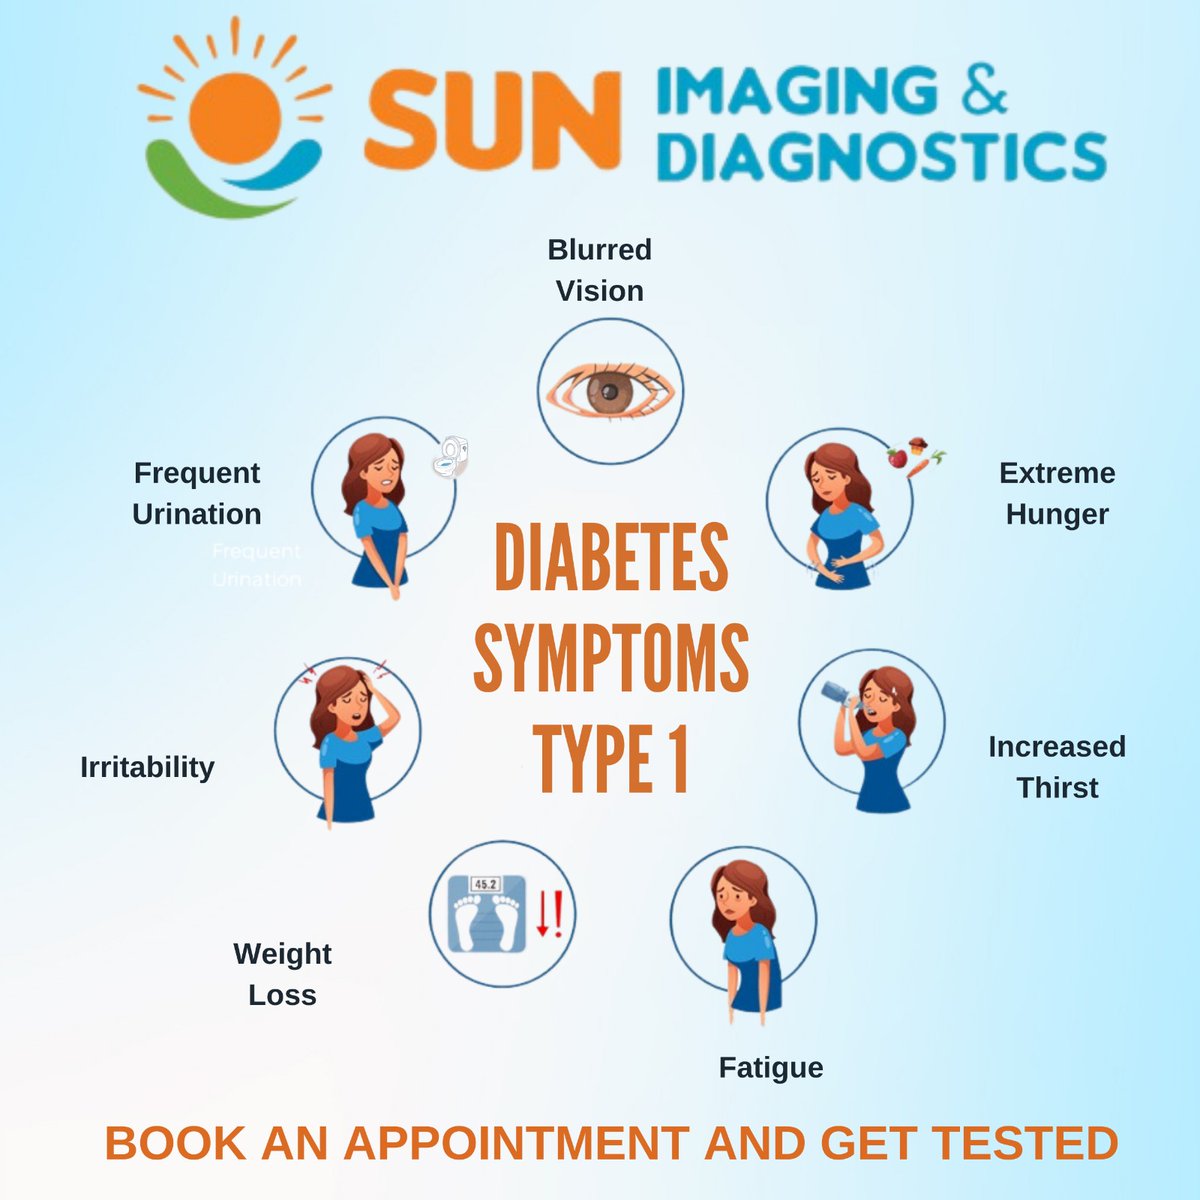 Sun Imaging & Diagnostics Shines a Light on Type 1 Diabetes Awareness! 

#SunImagingandDiagnostics #doorstepservices #SampleCollection #WellnessMatters #Highqualityscanningservices #HealthCheck #WellnessRoutine #PreventiveCare #CheckUpTime #RoutineHealth #StayHealthy